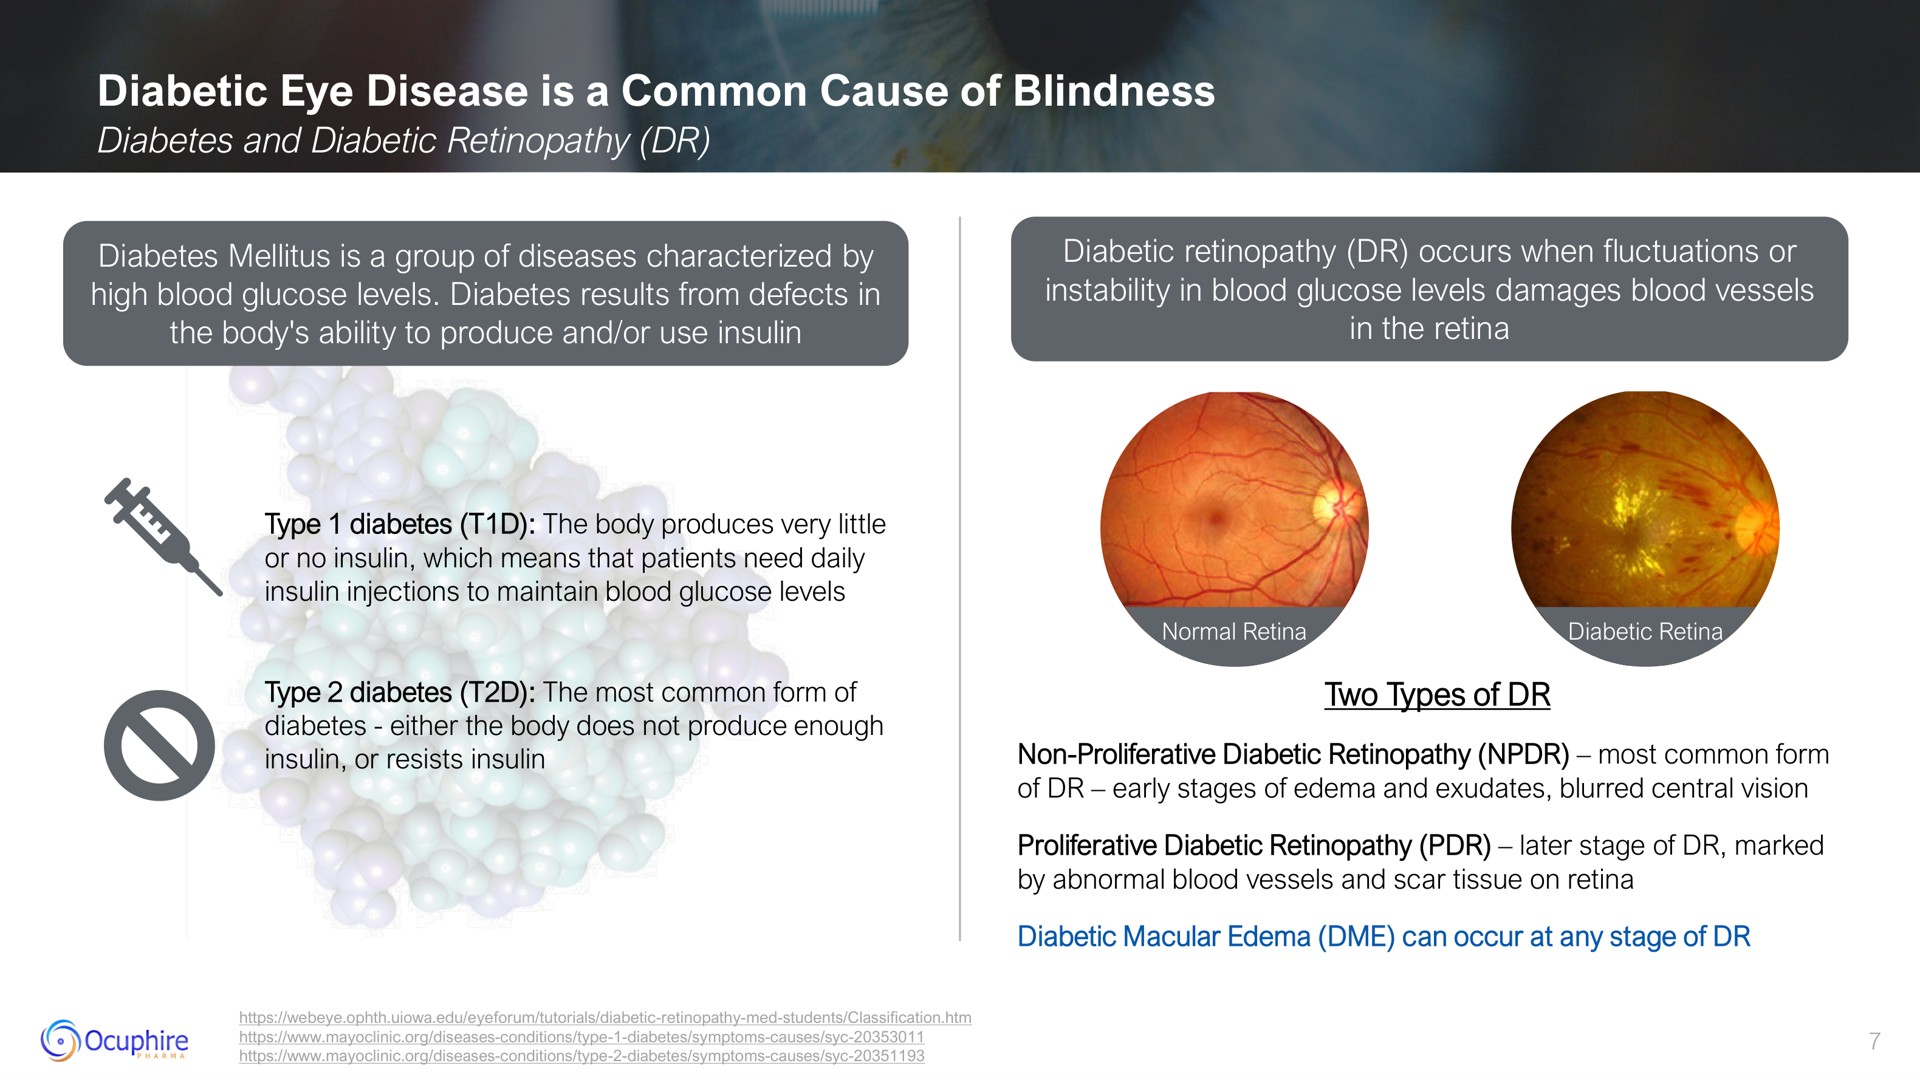 diabetic eye disease is a common cause of blindness | Ocuphire Pharma